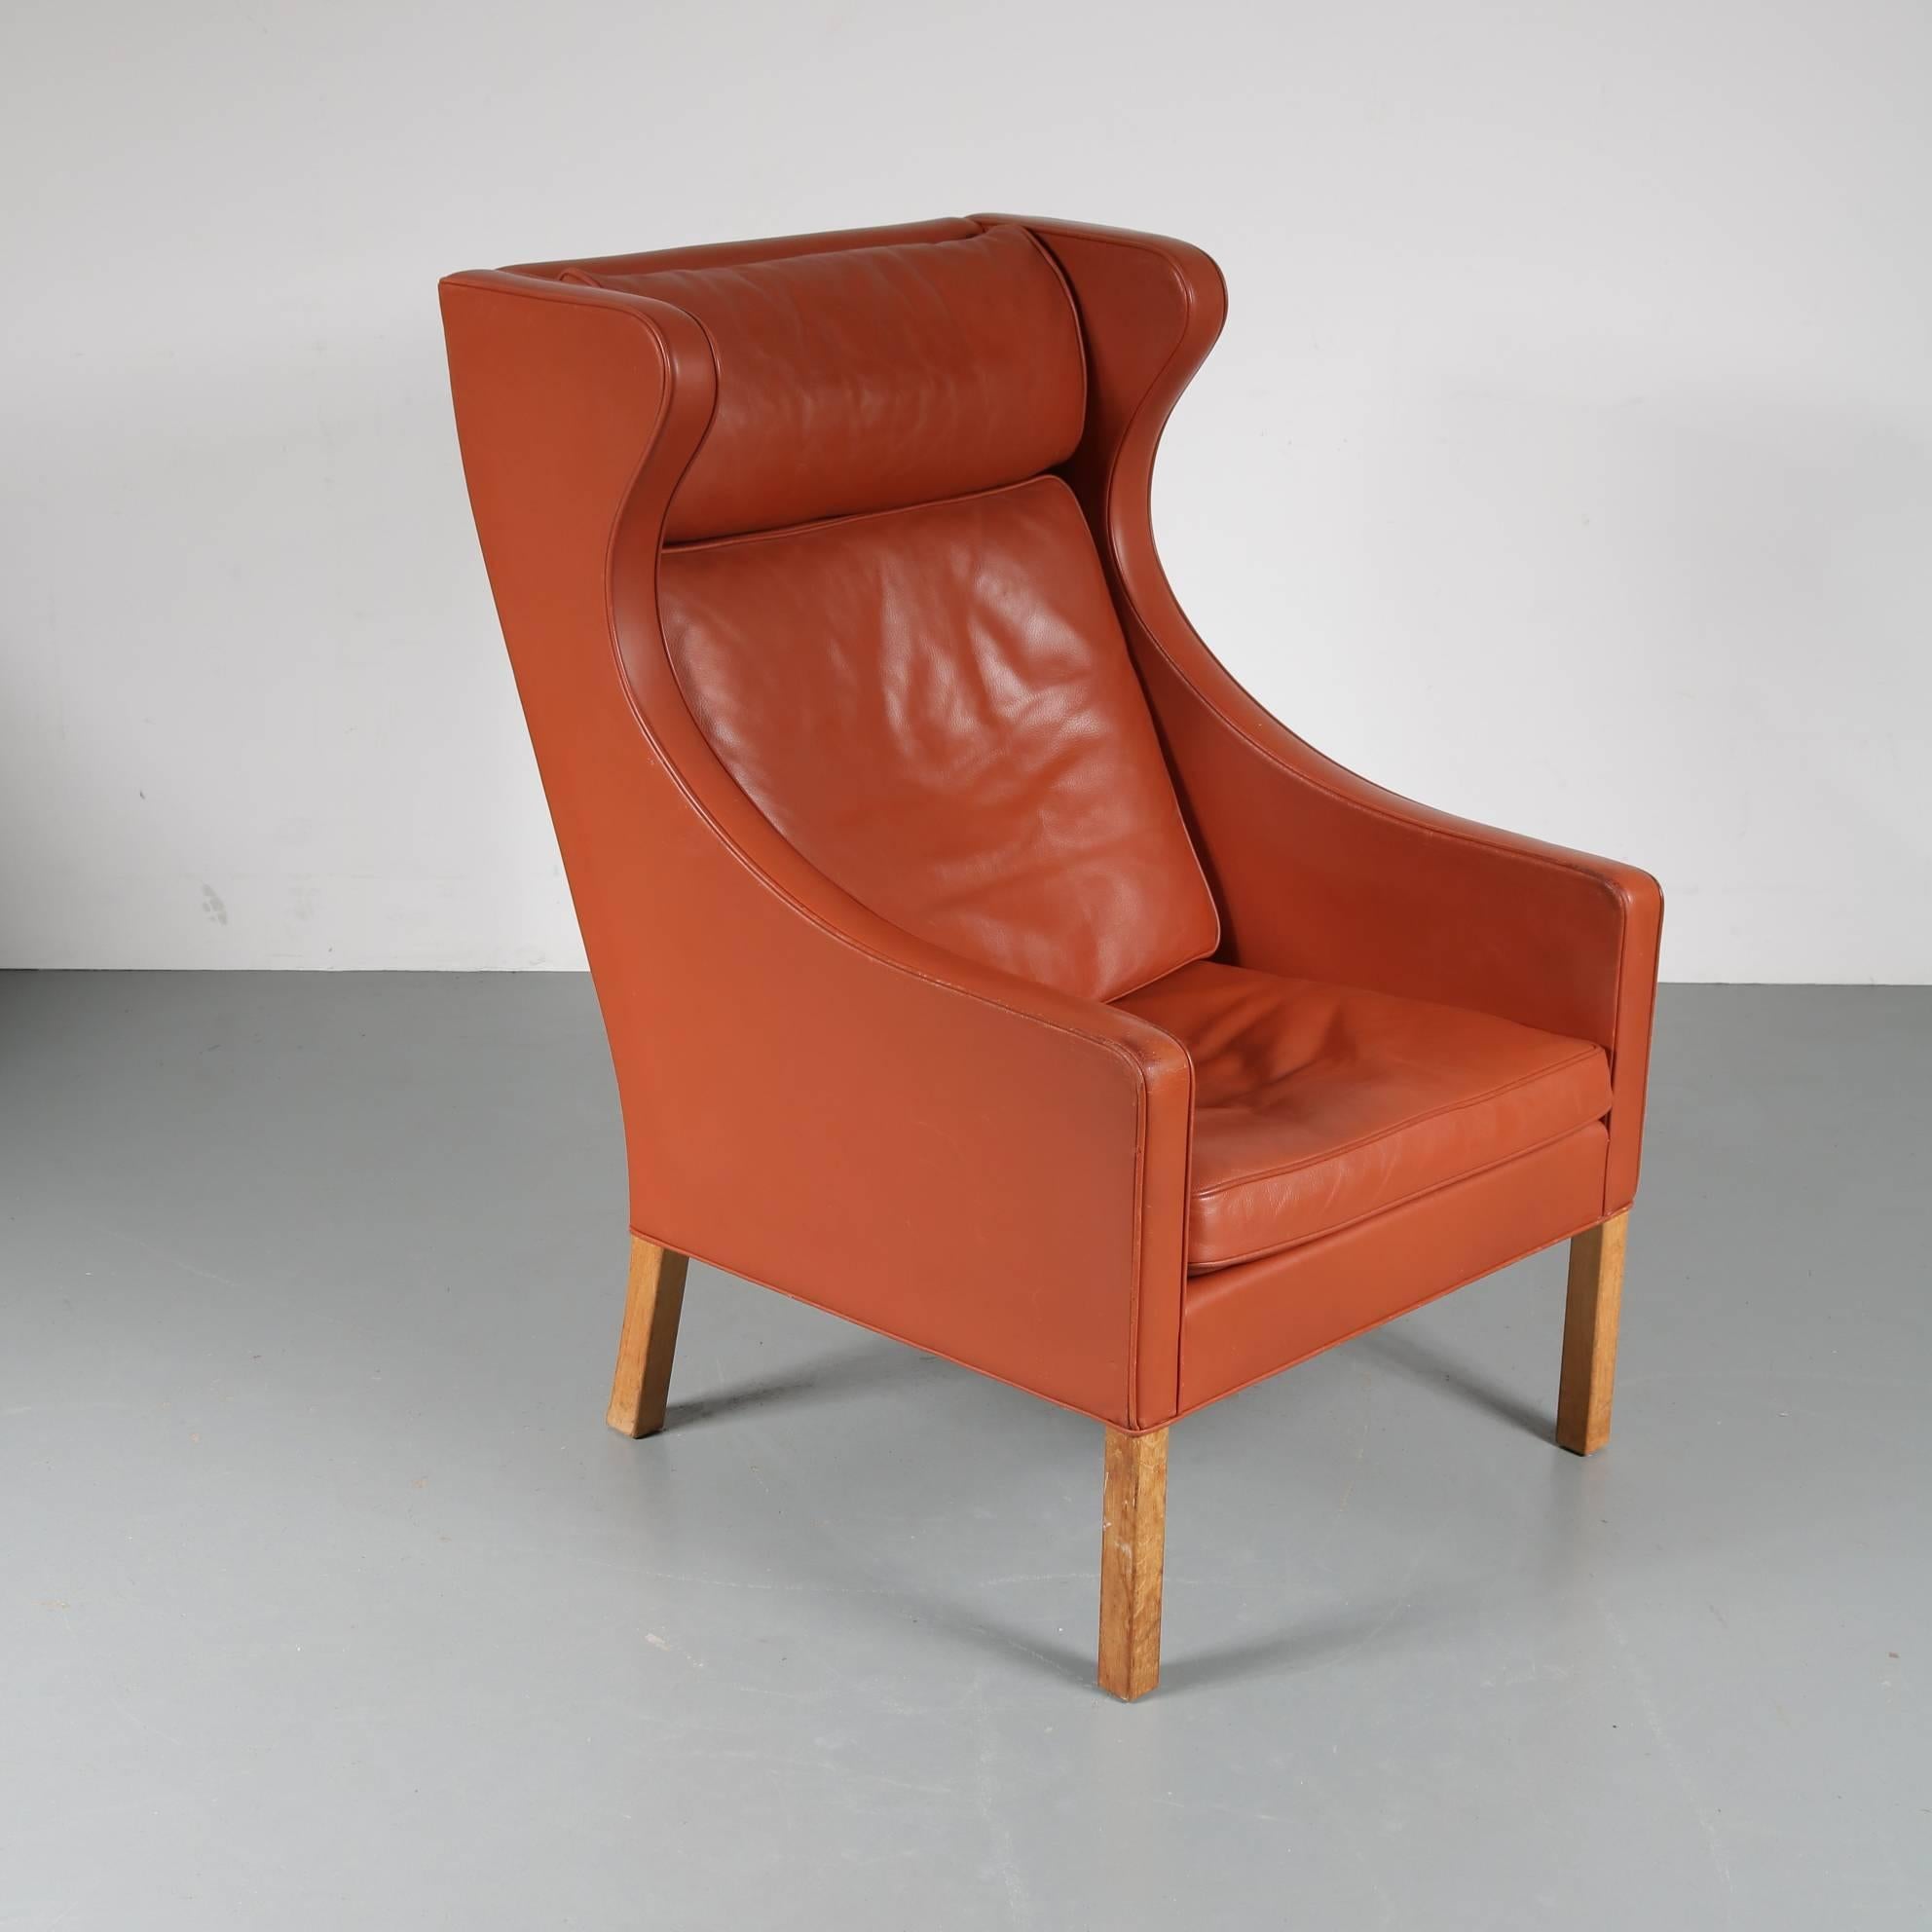 High back wingchair designed by Børge Mogensen, manufactured by Fredericia in Denmark, circa 1960.

This beautiful seat has a sharply defined outline and a soft, inviting interior. This made it one of his most iconic designs. It is upholstered in